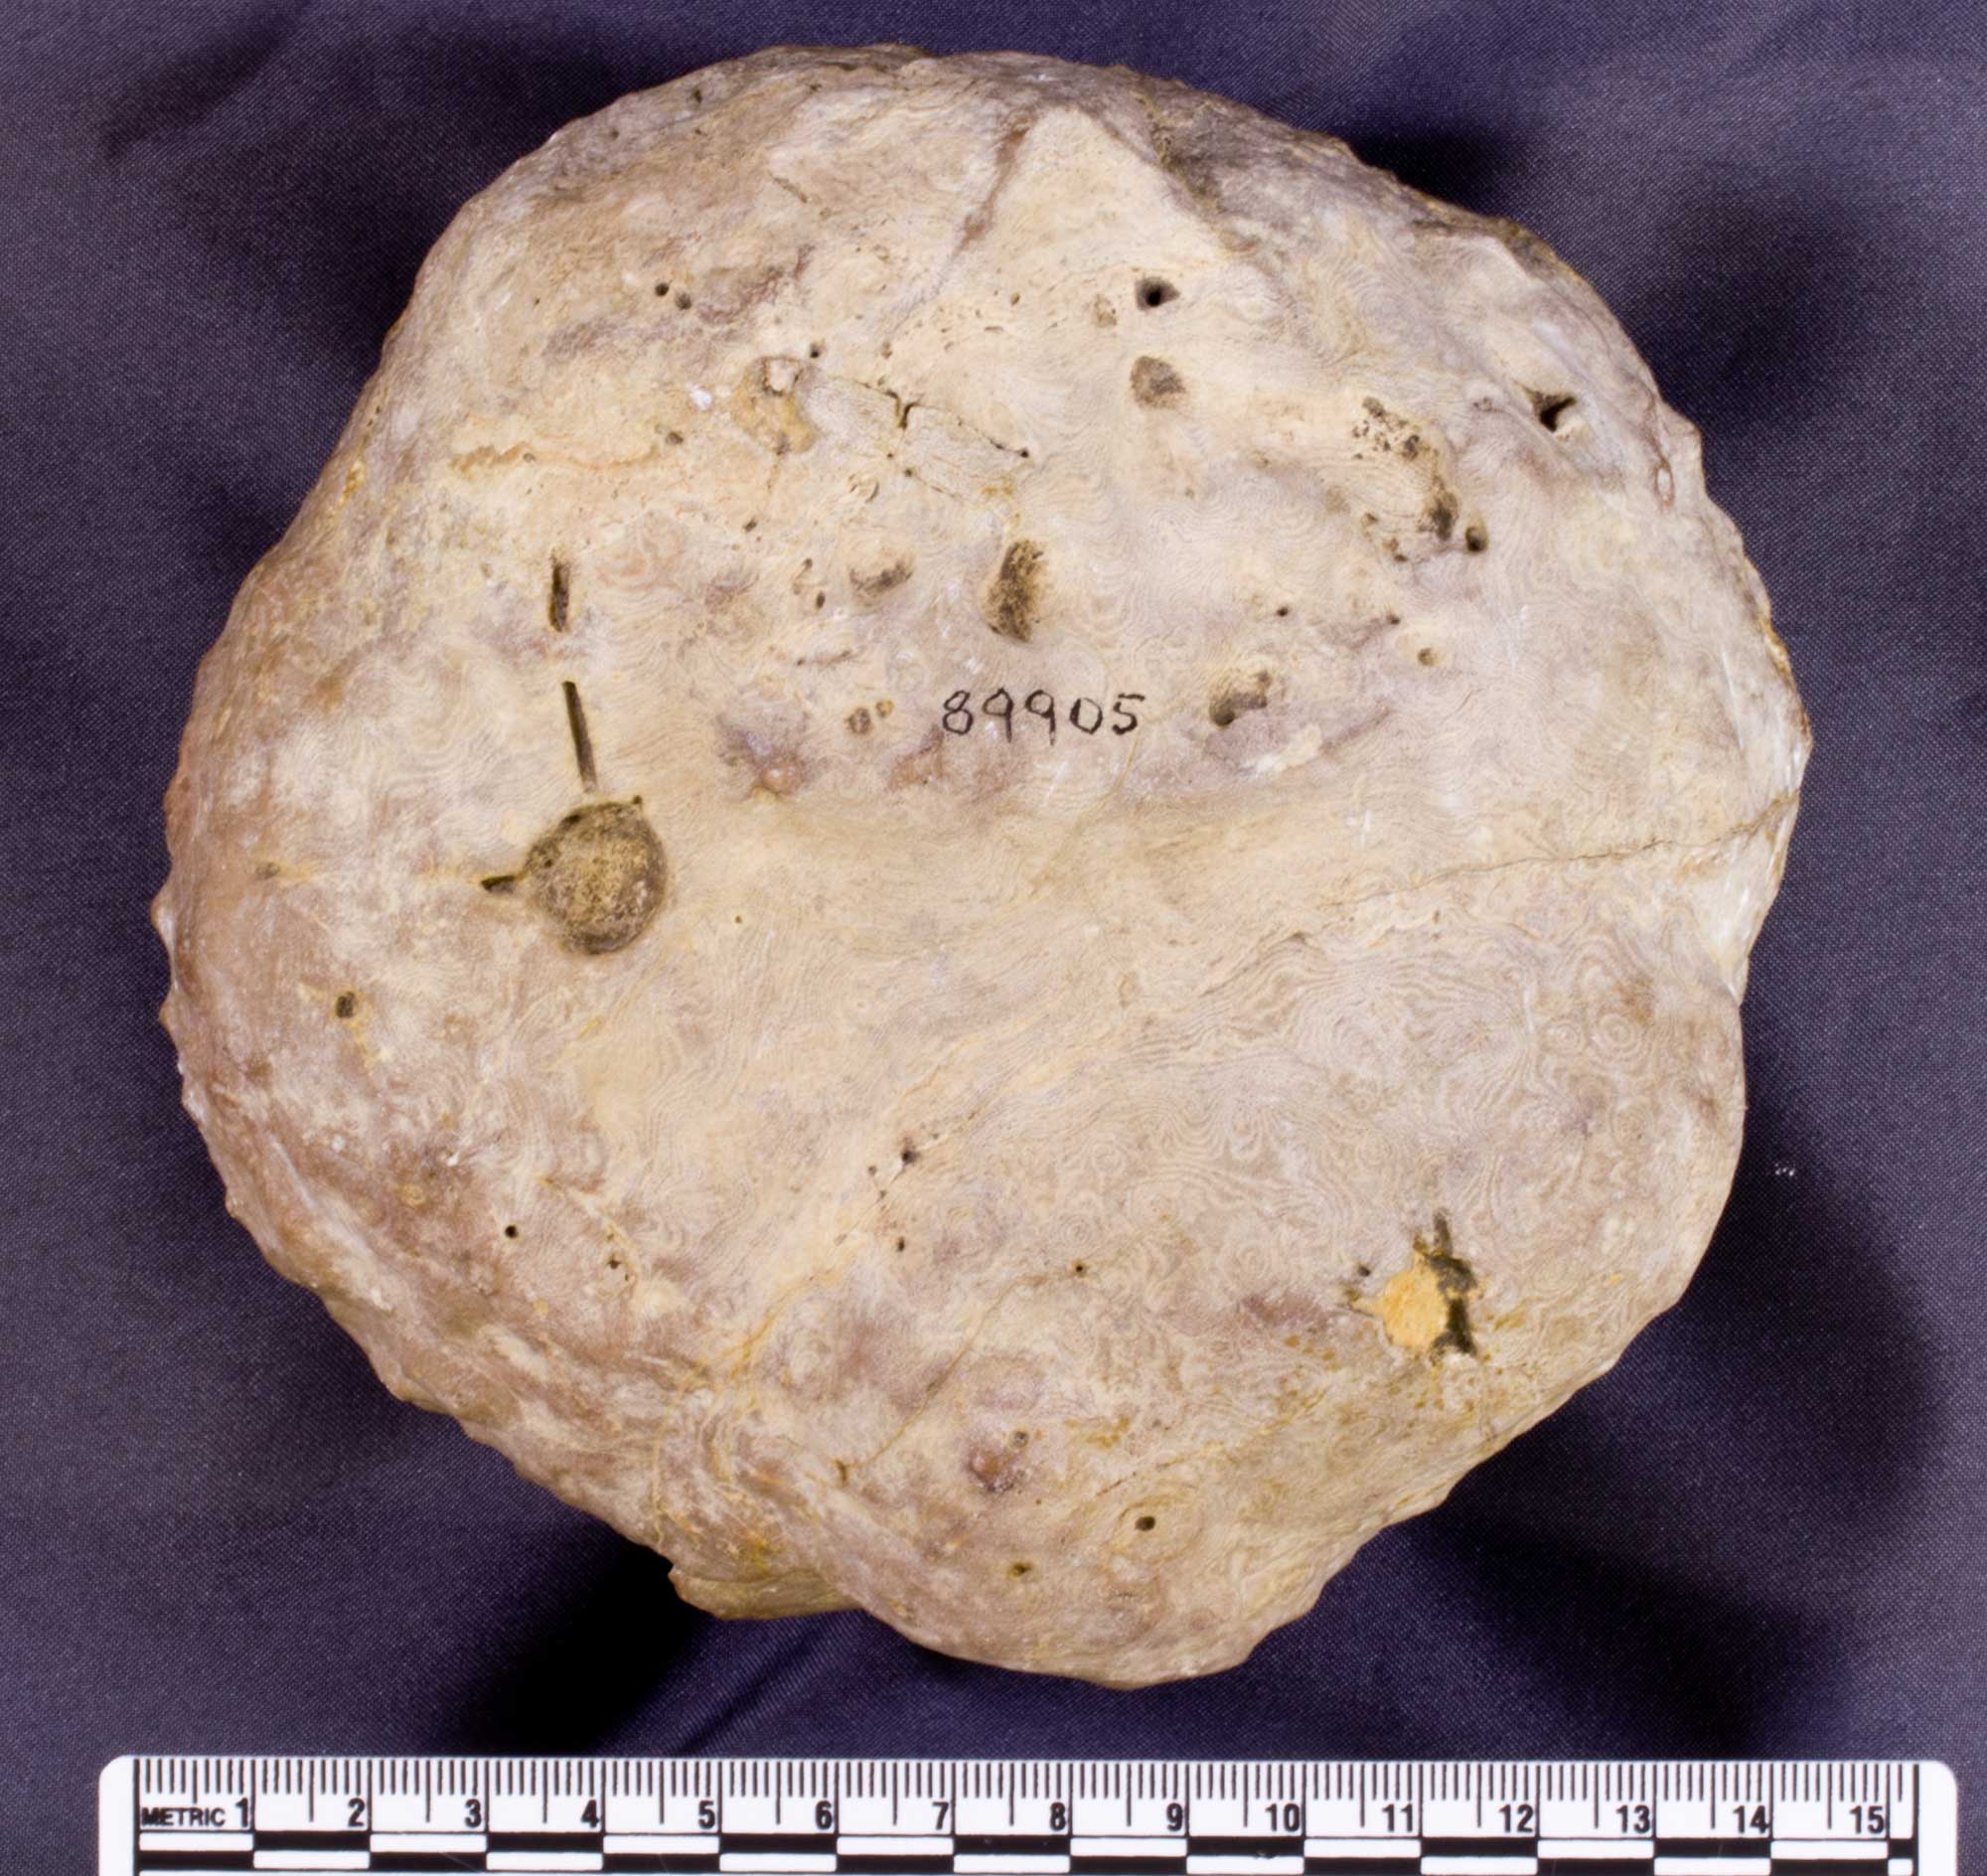 Photograph of a stromatoperoid from the Devonian of Iowa. The photo shows an off-white, spherical fossil with a light pattern of swirling lines on its surface. The fossil is about 13.5 centimeters in diameter.